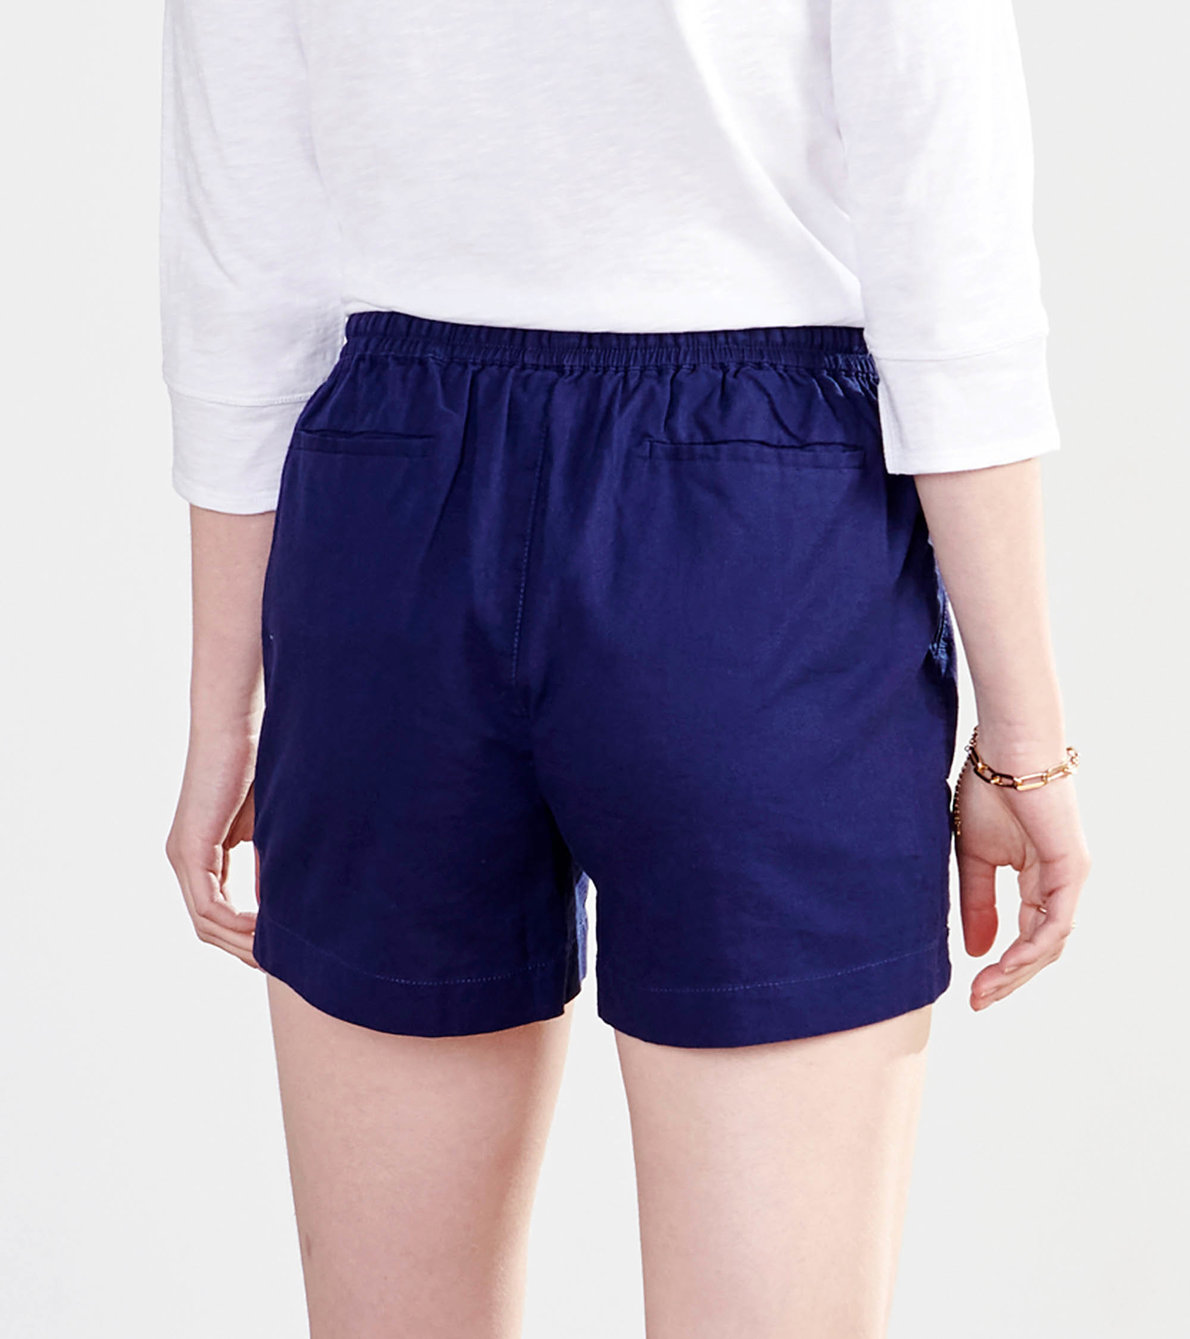 View larger image of Everywhere Shorts - Patriot Blue